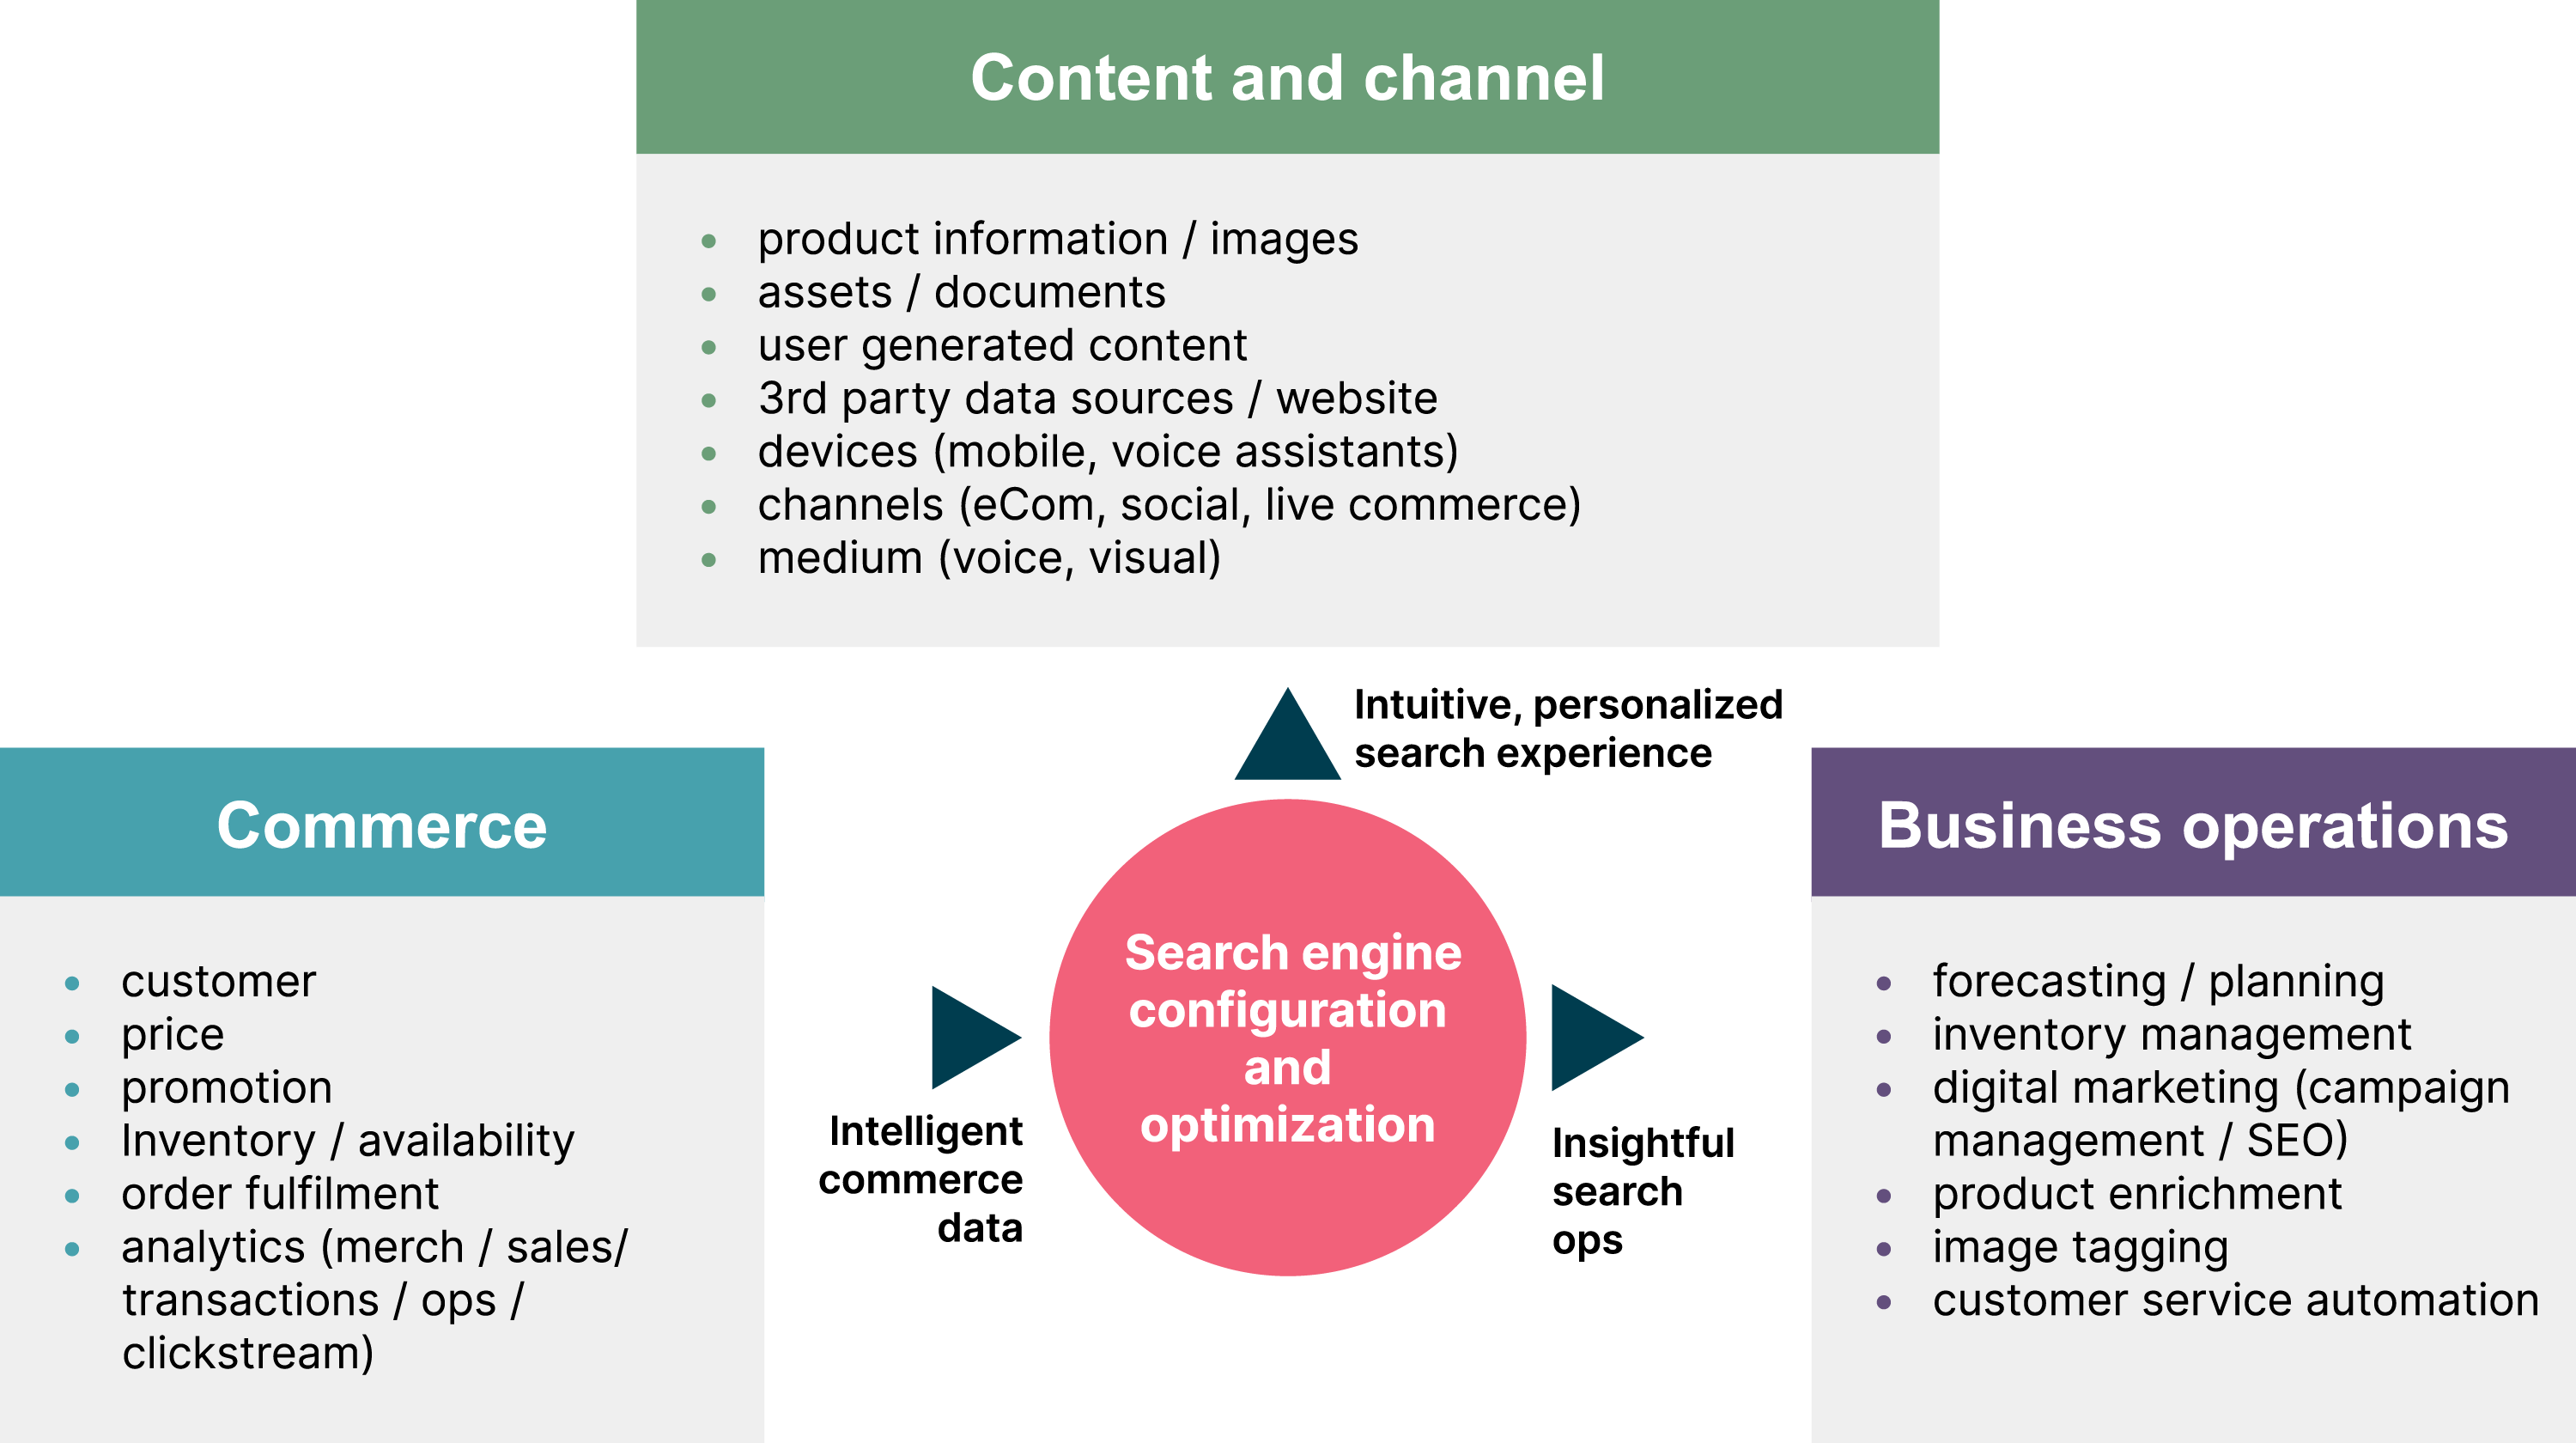 A figure showing three primary constructs to design, implement and optimize Search solutions. Content and Channel provides the right foundation in terms of medium of interactions and the right set of data to enable customers with ease of findability and purchase. Commerce drives additional insights to further drive relevancy and personalisation. Business Operations provides a feedback mechanism where search insights can be leveraged to optimize upstream business functions like product enrichment, inventory planning etc.